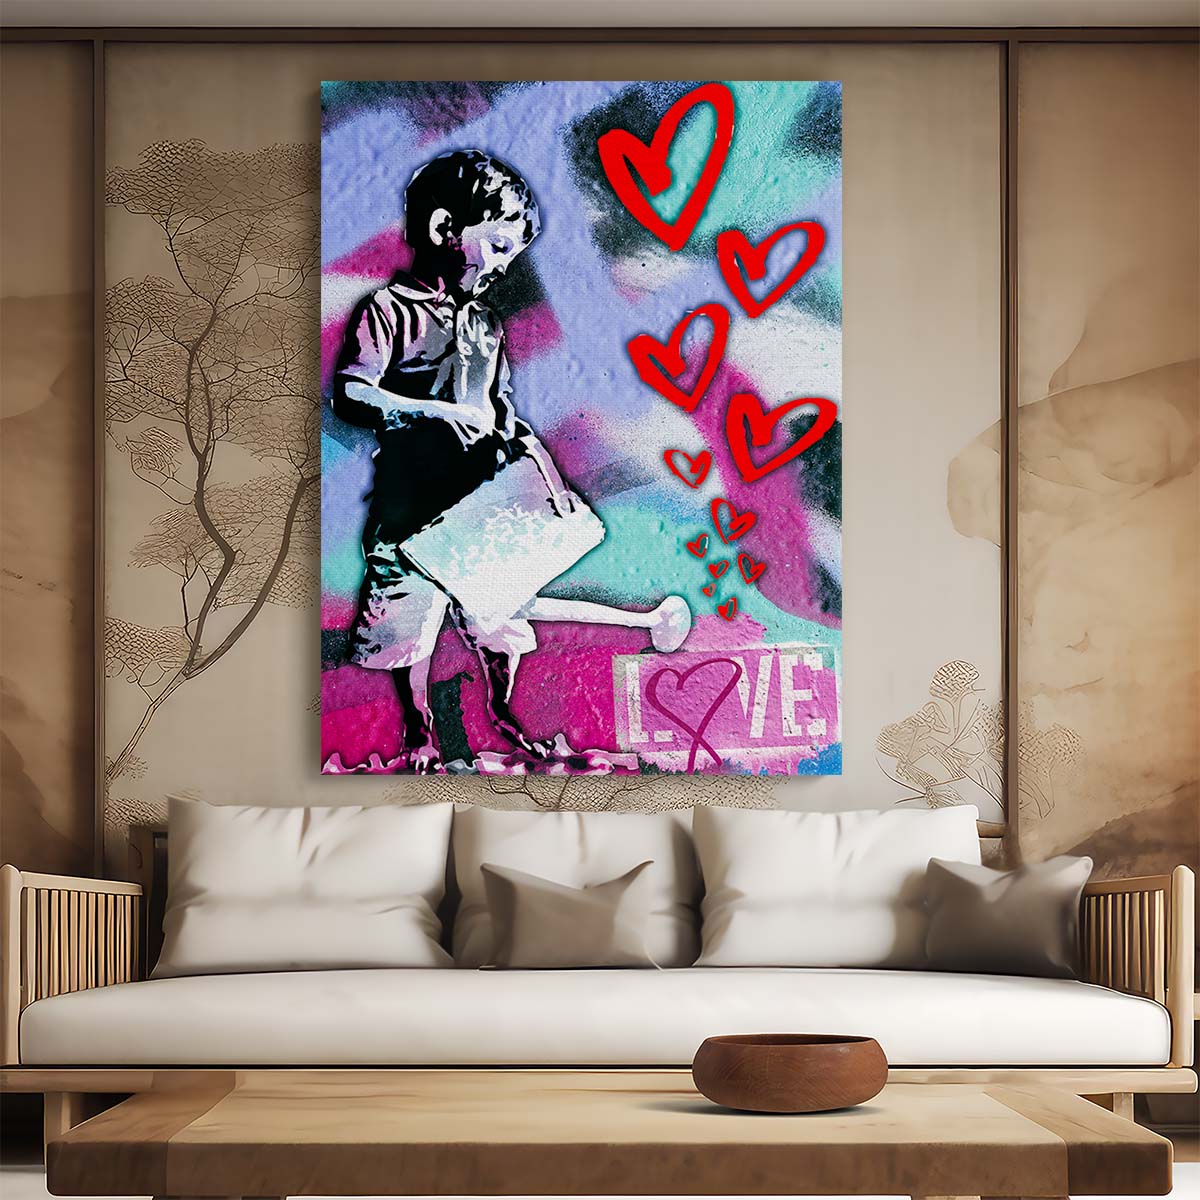 Banksy Child Love Street Graffiti Wall Art by Luxuriance Designs. Made in USA.